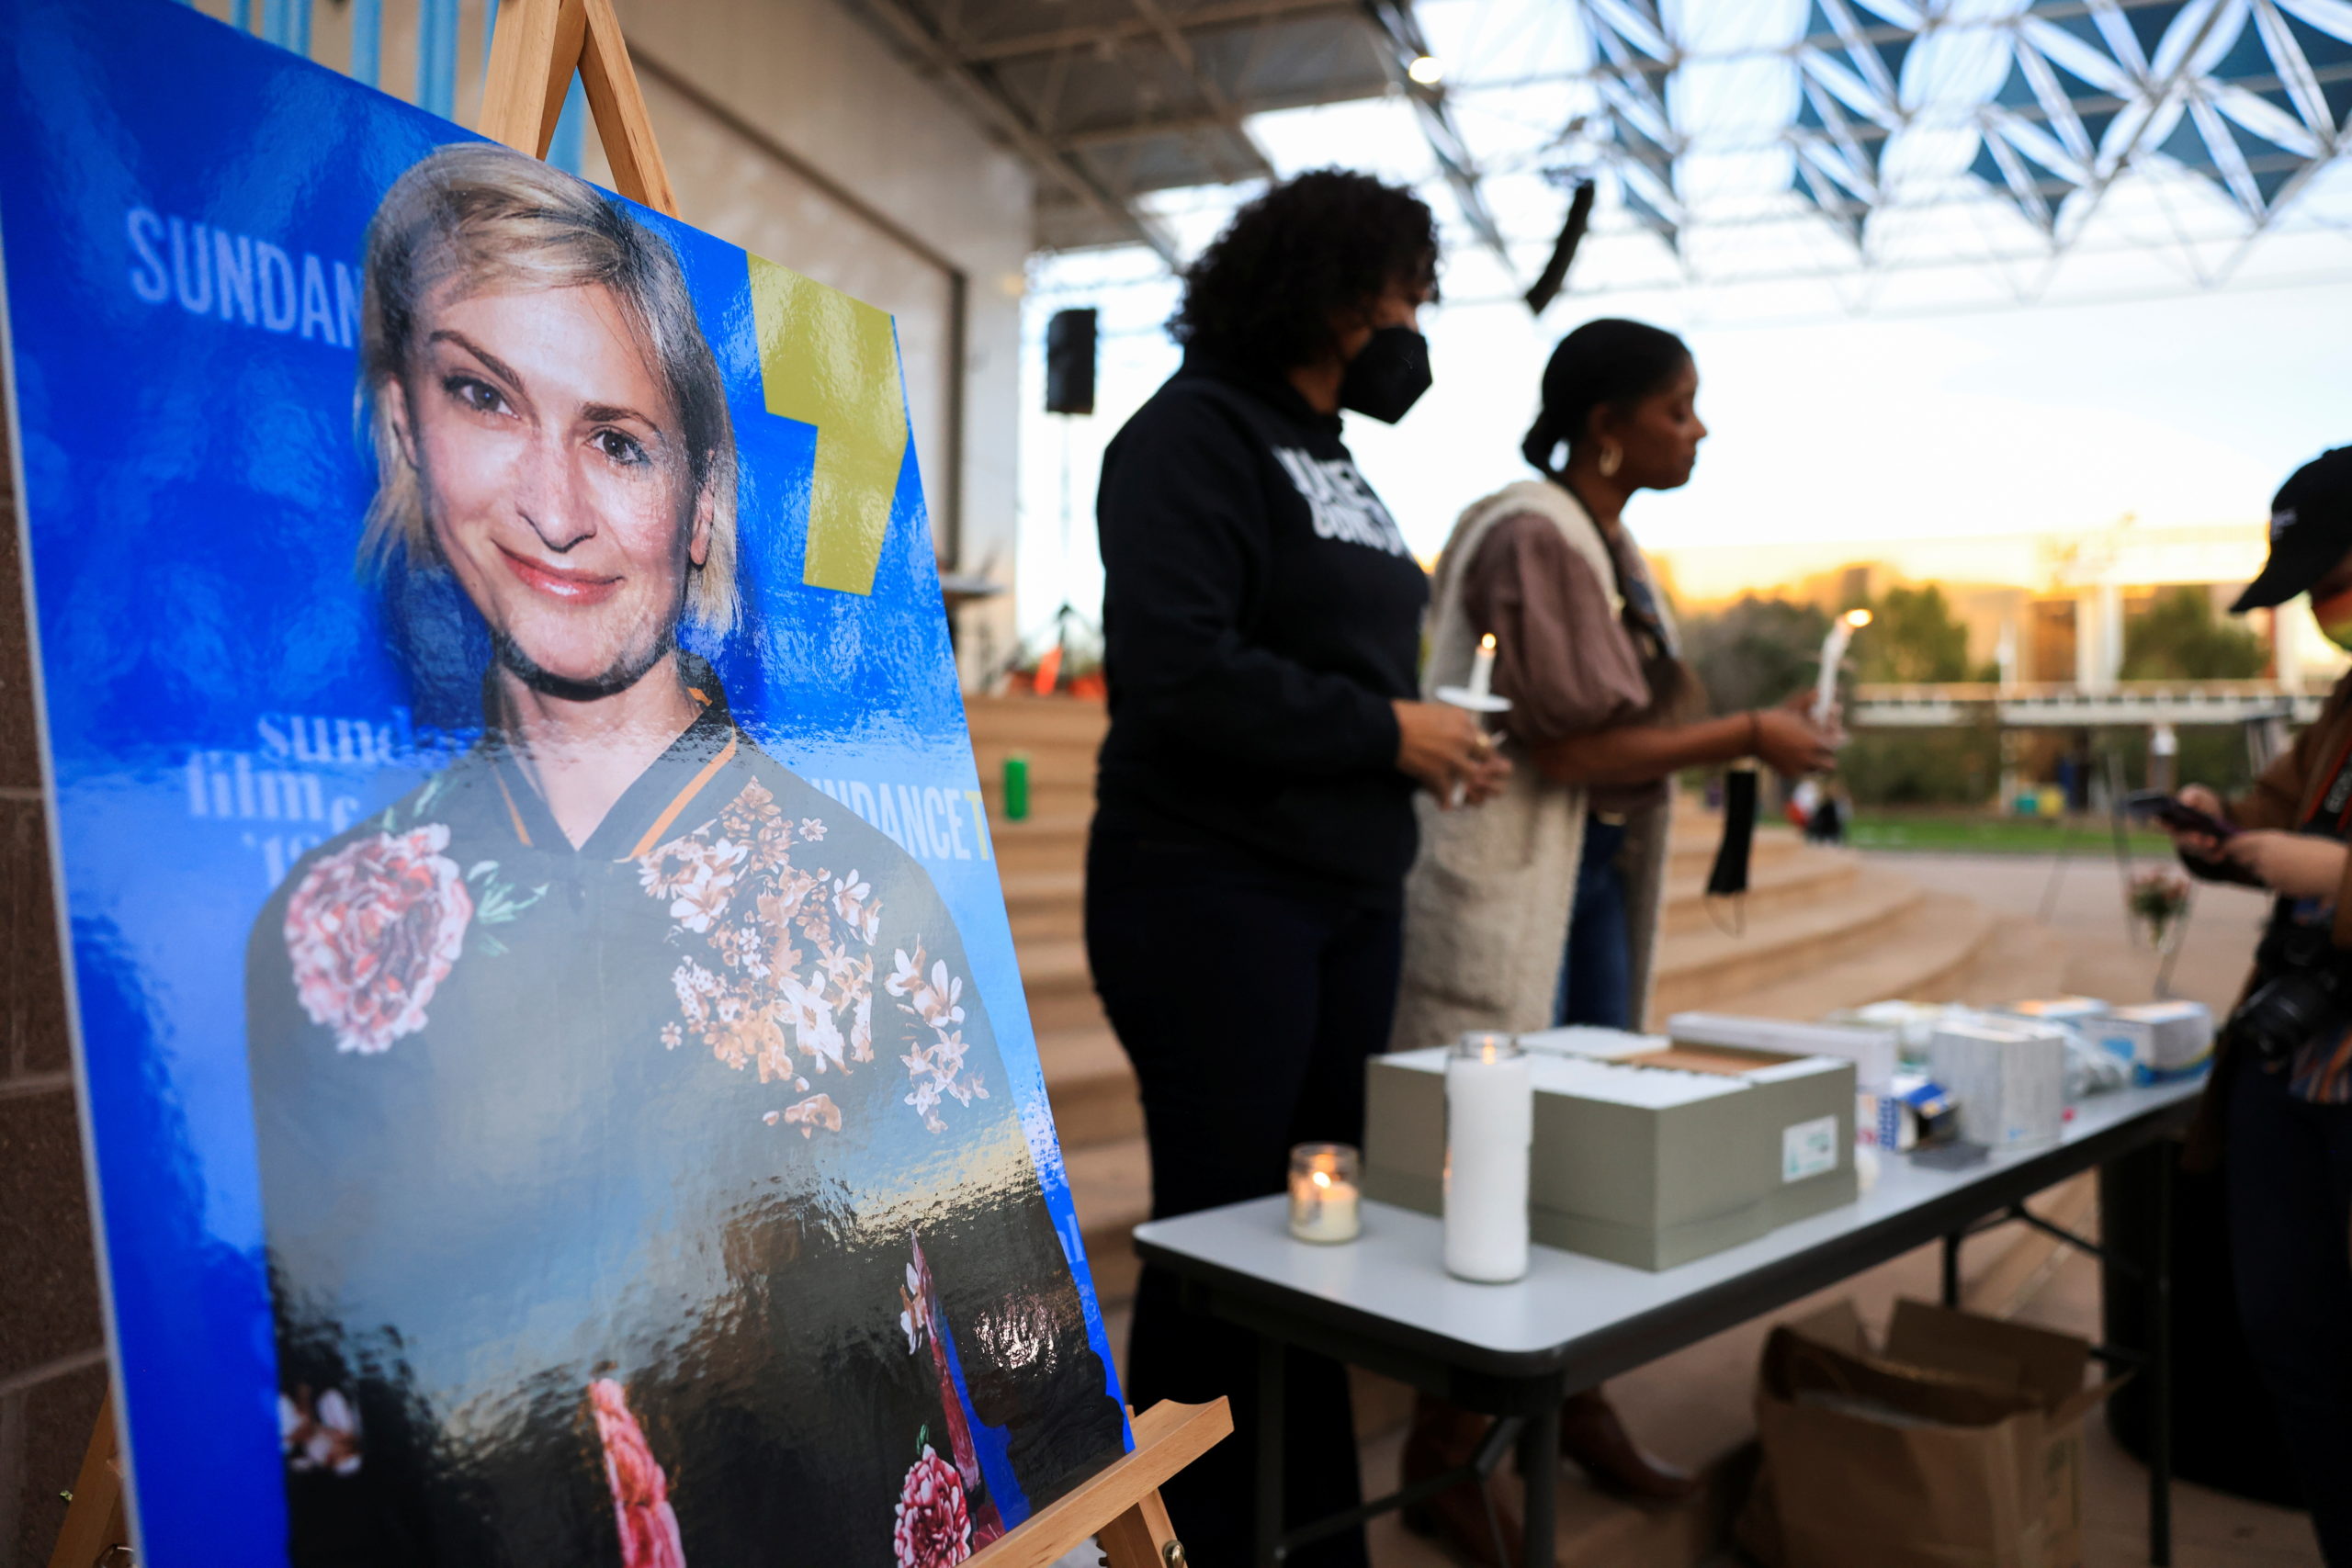 An image of cinematographer Halyna Hutchins, who died after being shot by Alec Baldwin on the set of his movie "Rust", is displayed at a vigil in her honour in Albuquerque, New Mexico, U.S., October 23, 2021. REUTERS/Kevin Mohatt